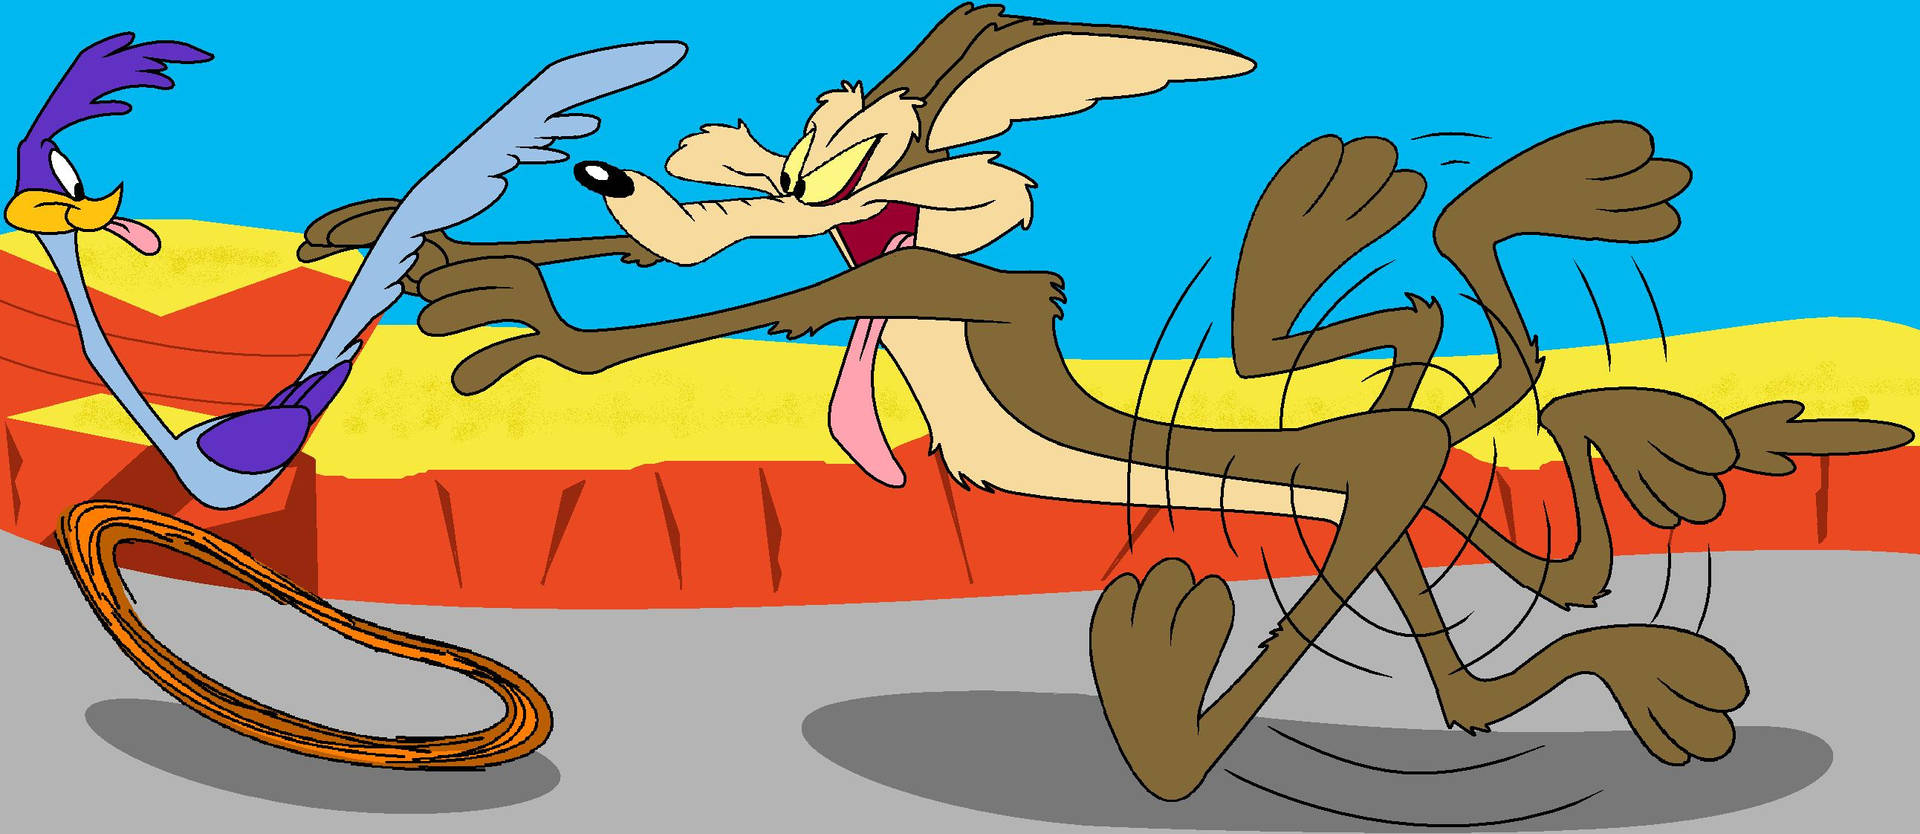 Wile E Coyote Road Runner Background